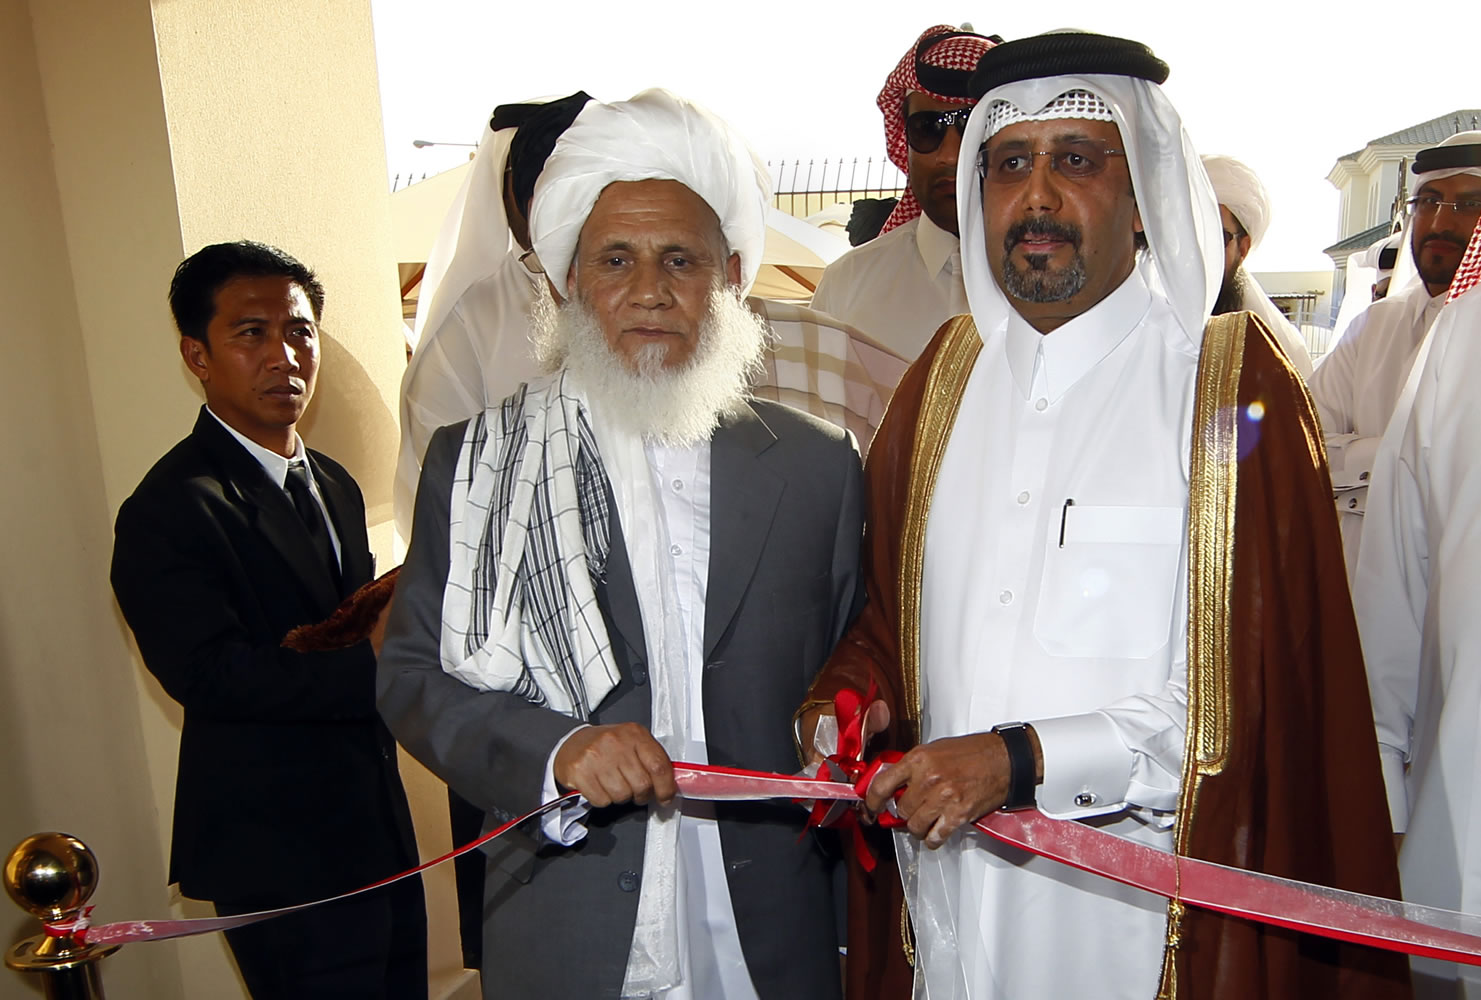 Qatari Assistant Minister for Foreign Affairs Ali bin Fahd al-Hajri, center right, and Jan Mohammad Madani, center left, a Taliban official, cut the ribbon at the official opening ceremony of a Taliban office Tuesday in Doha, Qatar.